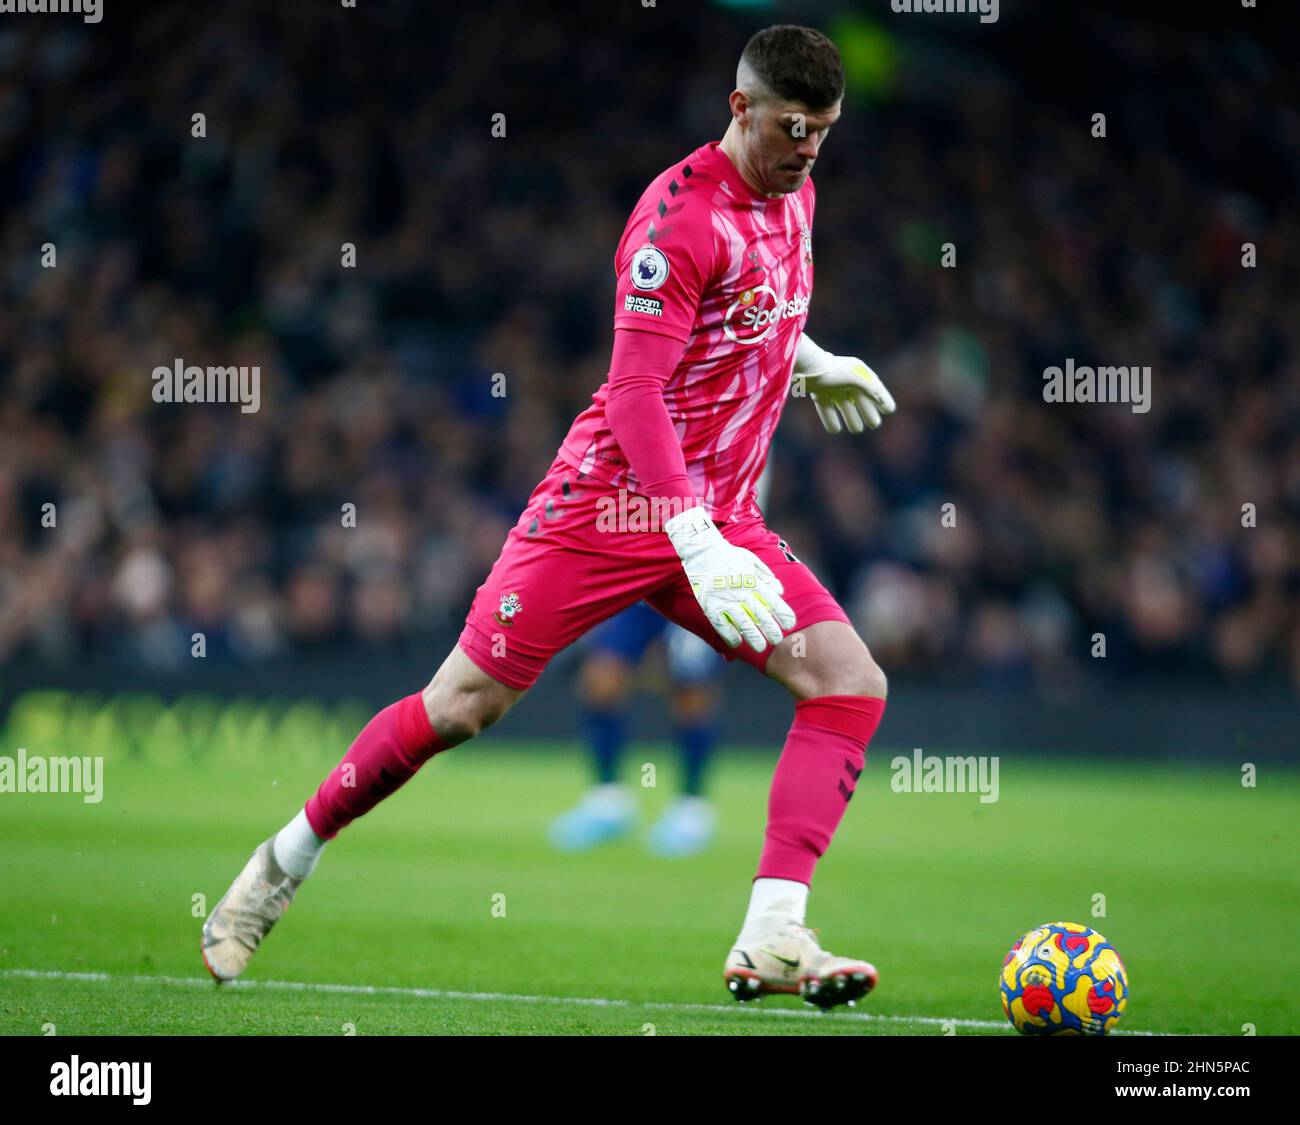 London, England - FEBRUARY 09: Southampton's Fraser Forster during  Premier League between Tottenham Hotspur and Southampton at Tottenham Hotspur stad Stock Photo